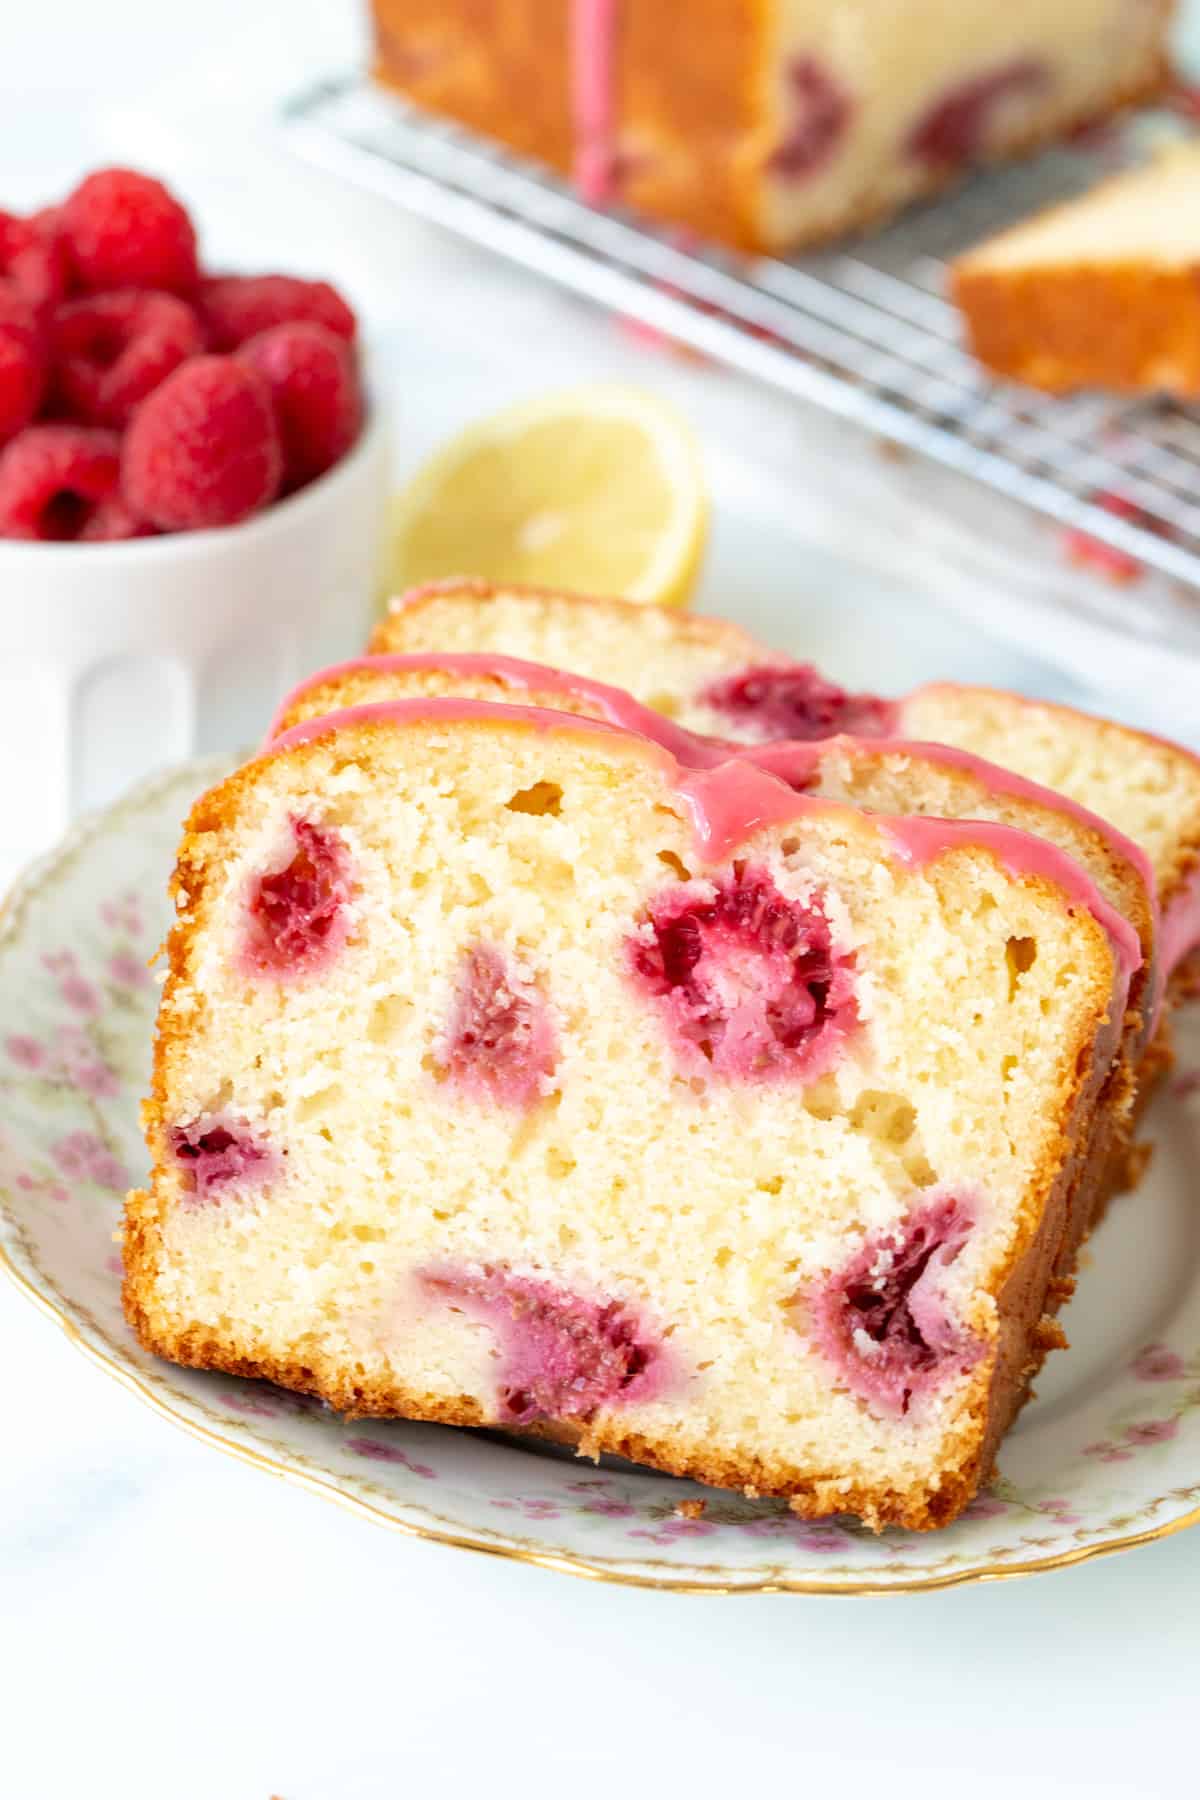 Slices of lemon raspberry loaf on a plate